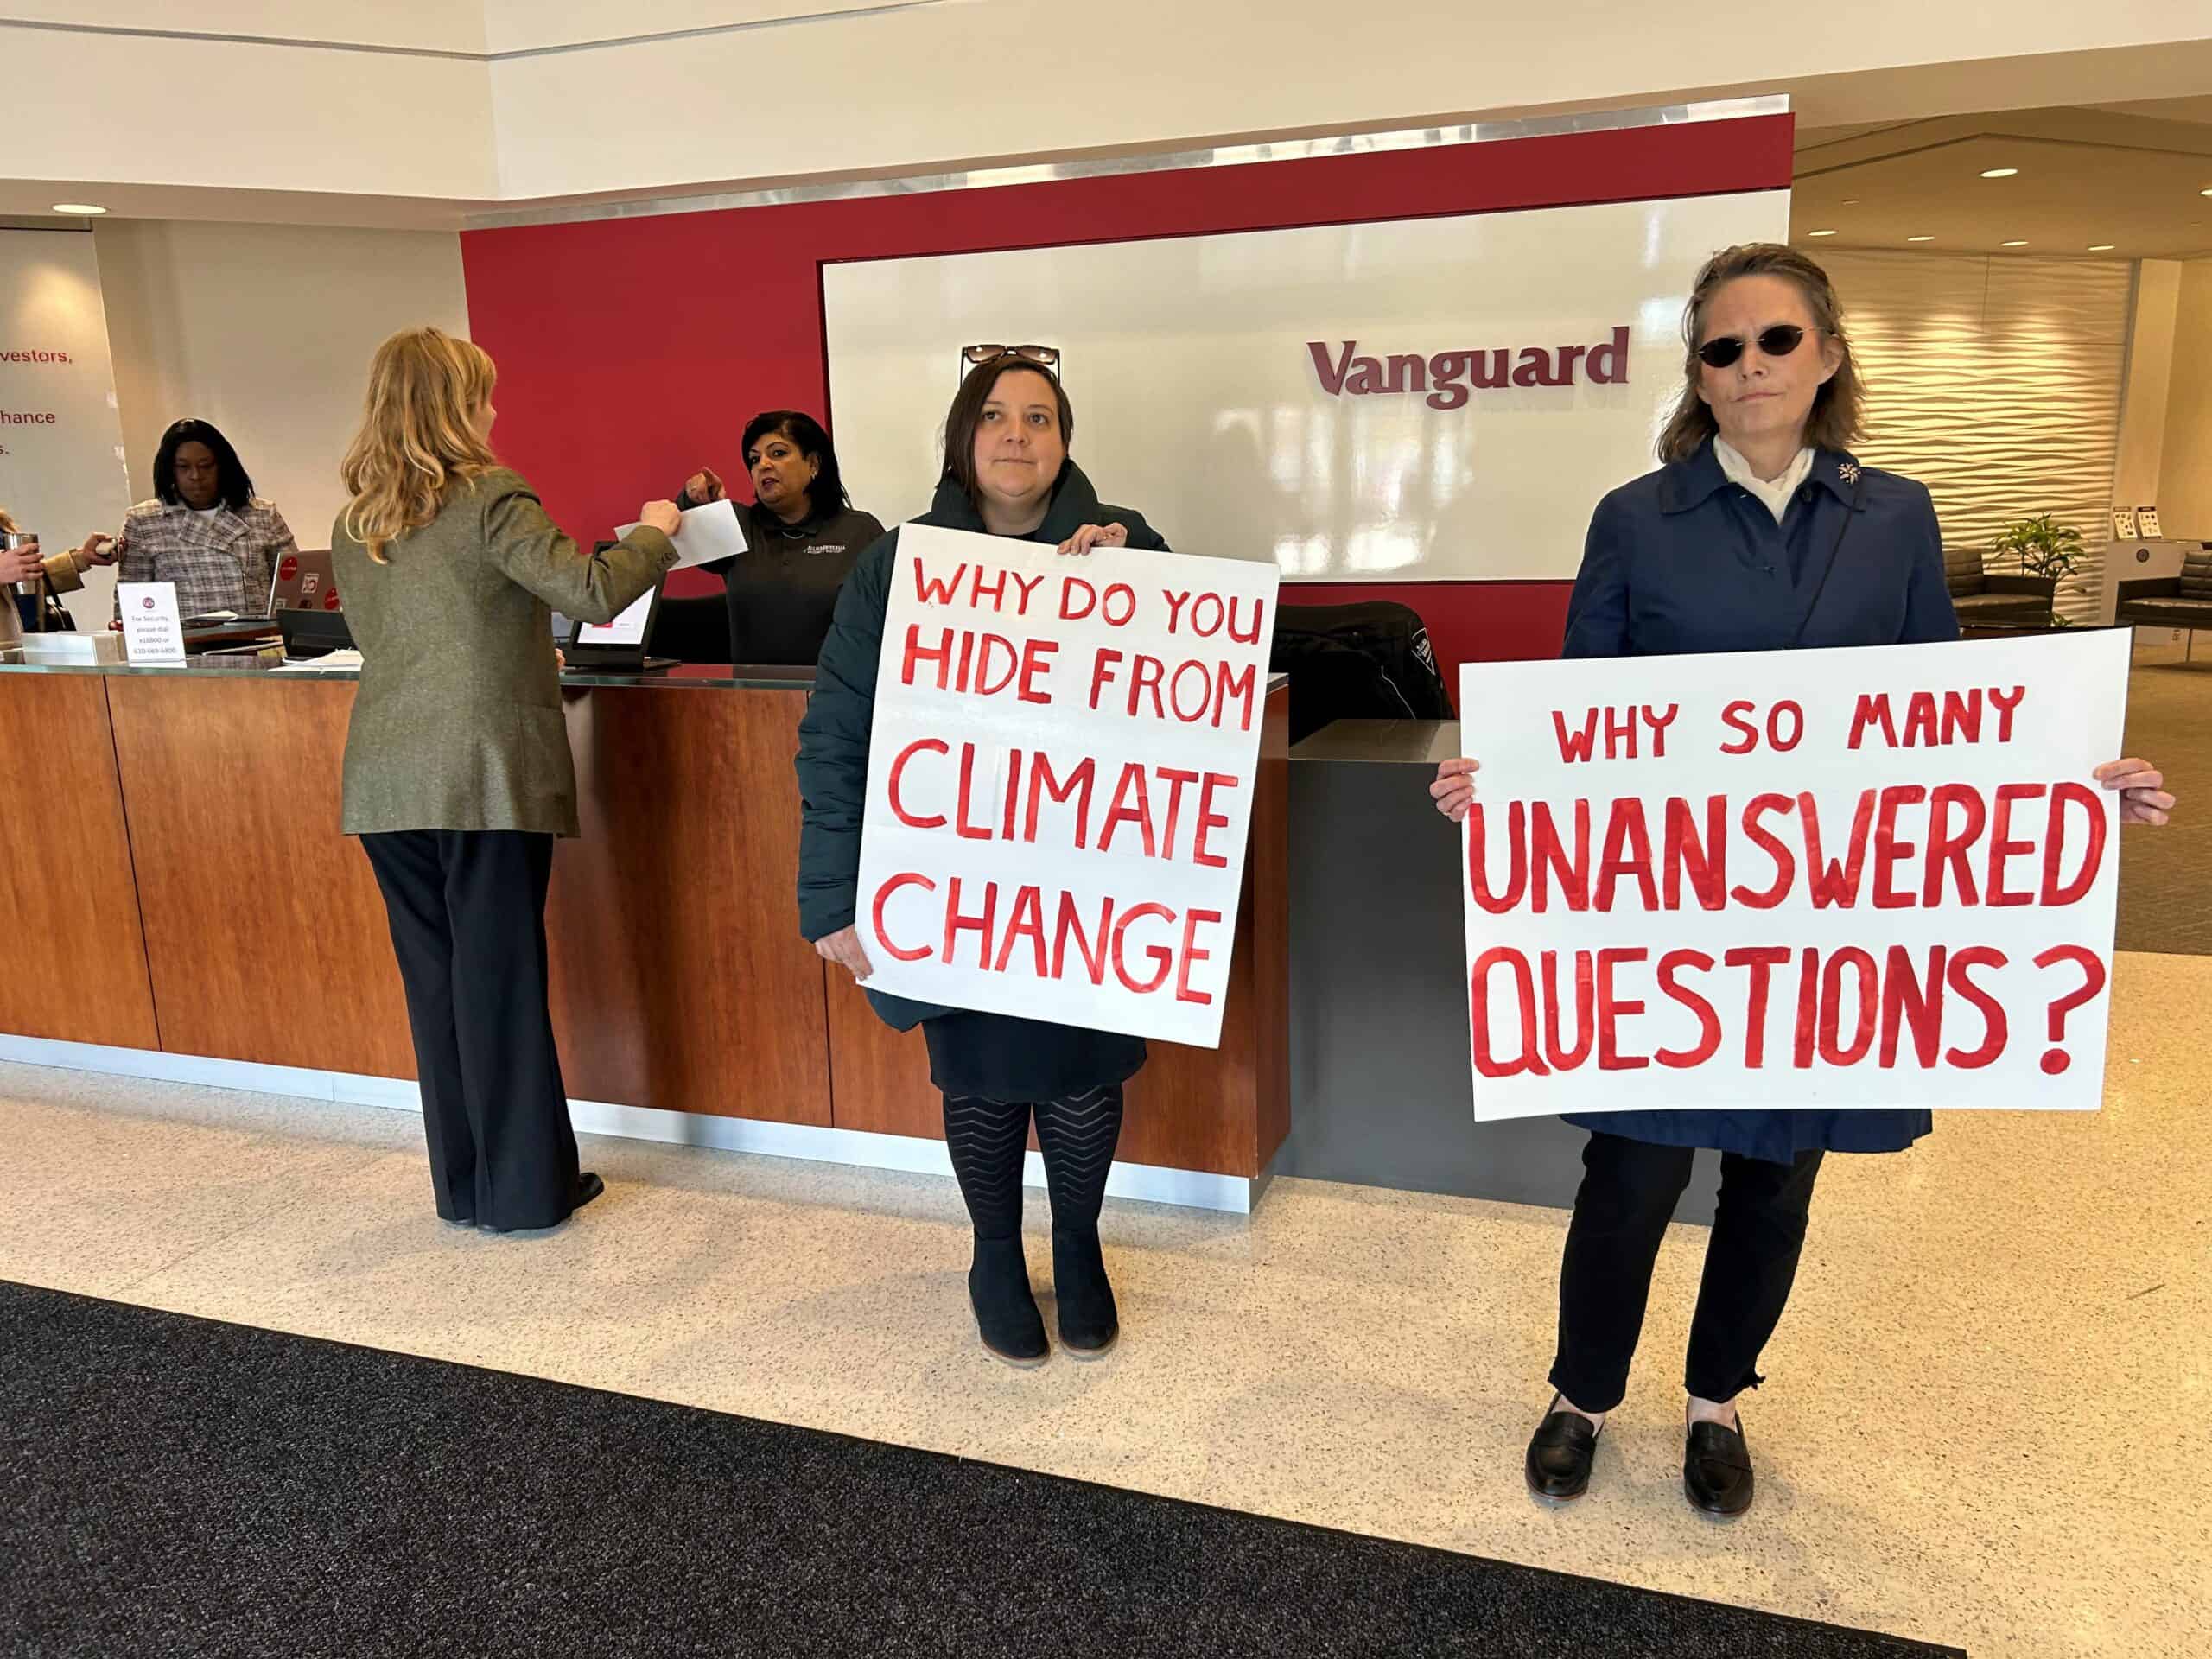 Inside a Vanguard office lobby, two people hold white signs with red text while another person hands a letter to a receptionist who is pointing.